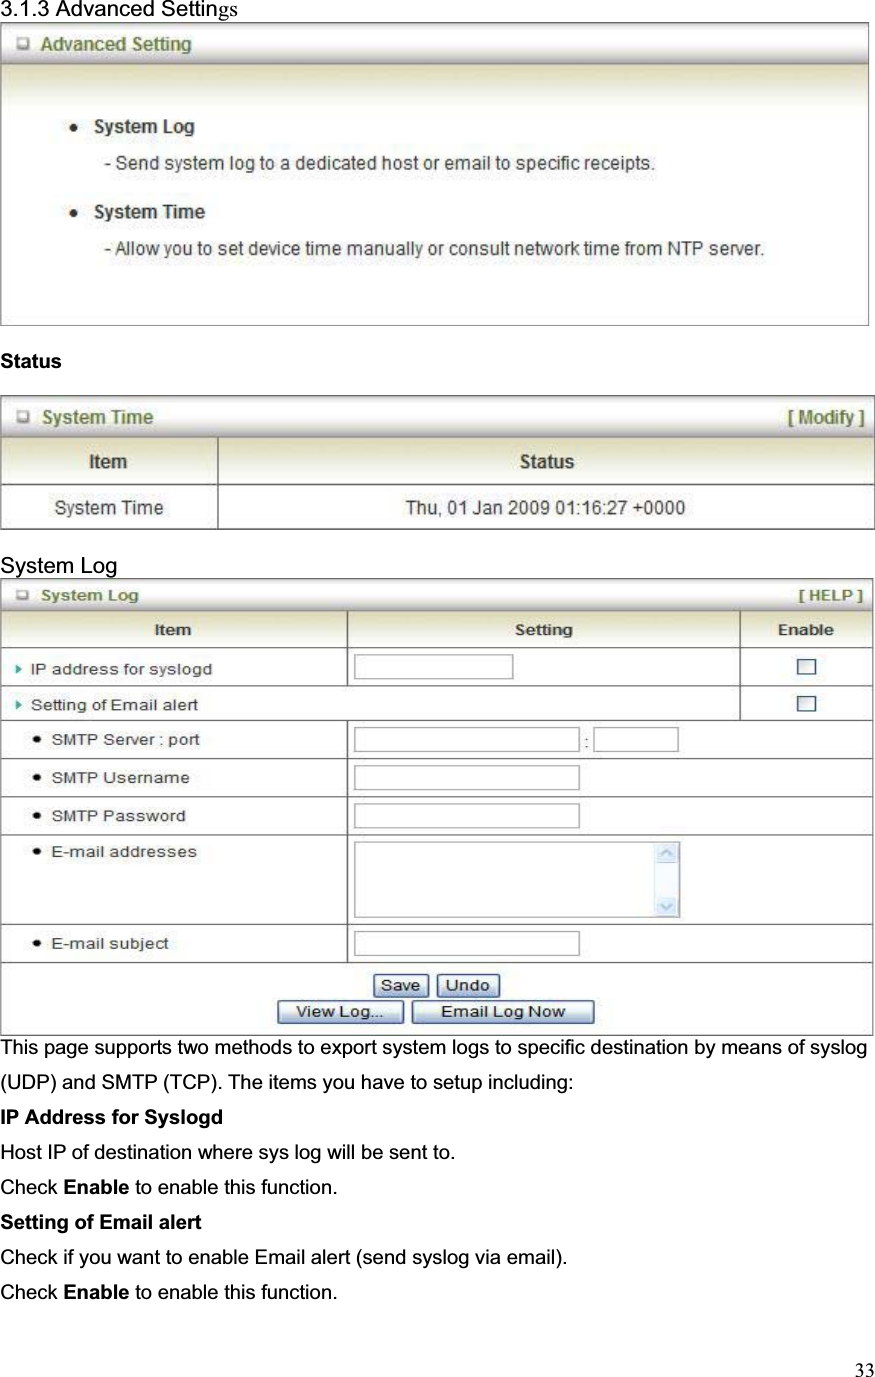 333.1.3 Advanced SettingsStatus System LogThis page supports two methods to export system logs to specific destination by means of syslog (UDP) and SMTP (TCP). The items you have to setup including:   IP Address for SyslogdHost IP of destination where sys log will be sent to. Check Enable to enable this function. Setting of Email alert Check if you want to enable Email alert (send syslog via email). Check Enable to enable this function. 